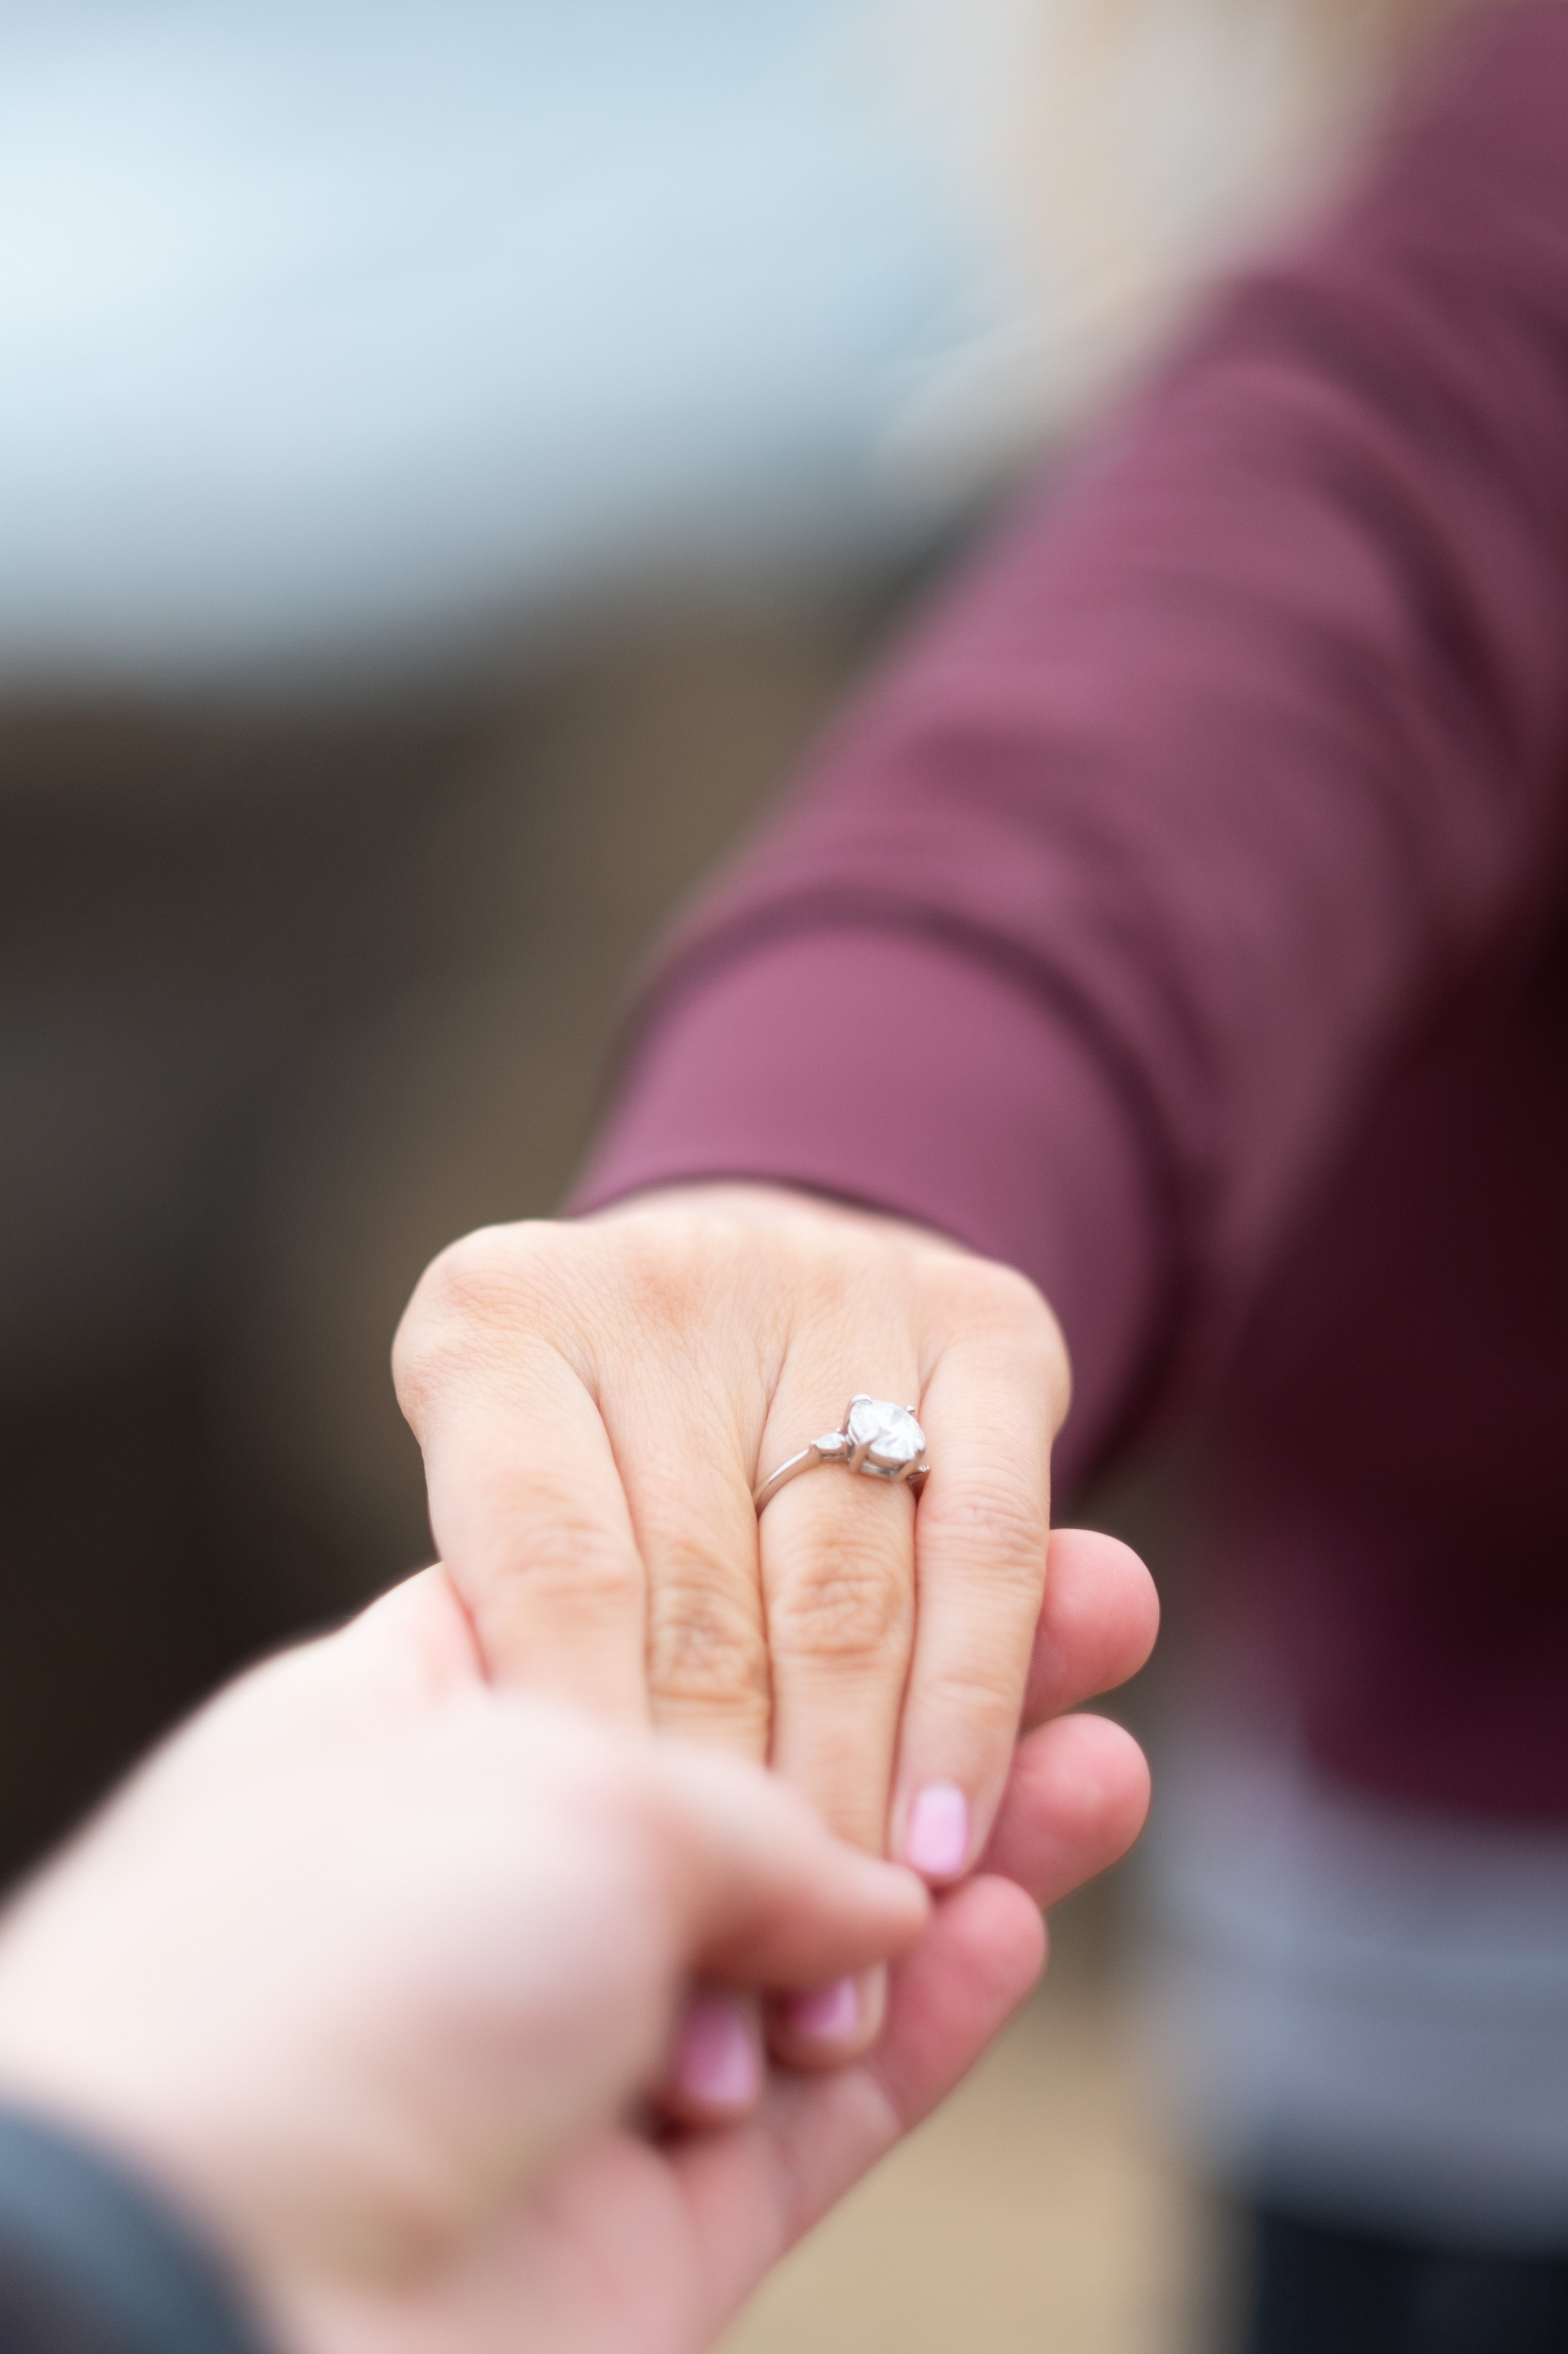 Free Photo | Crop close up male hand proposing